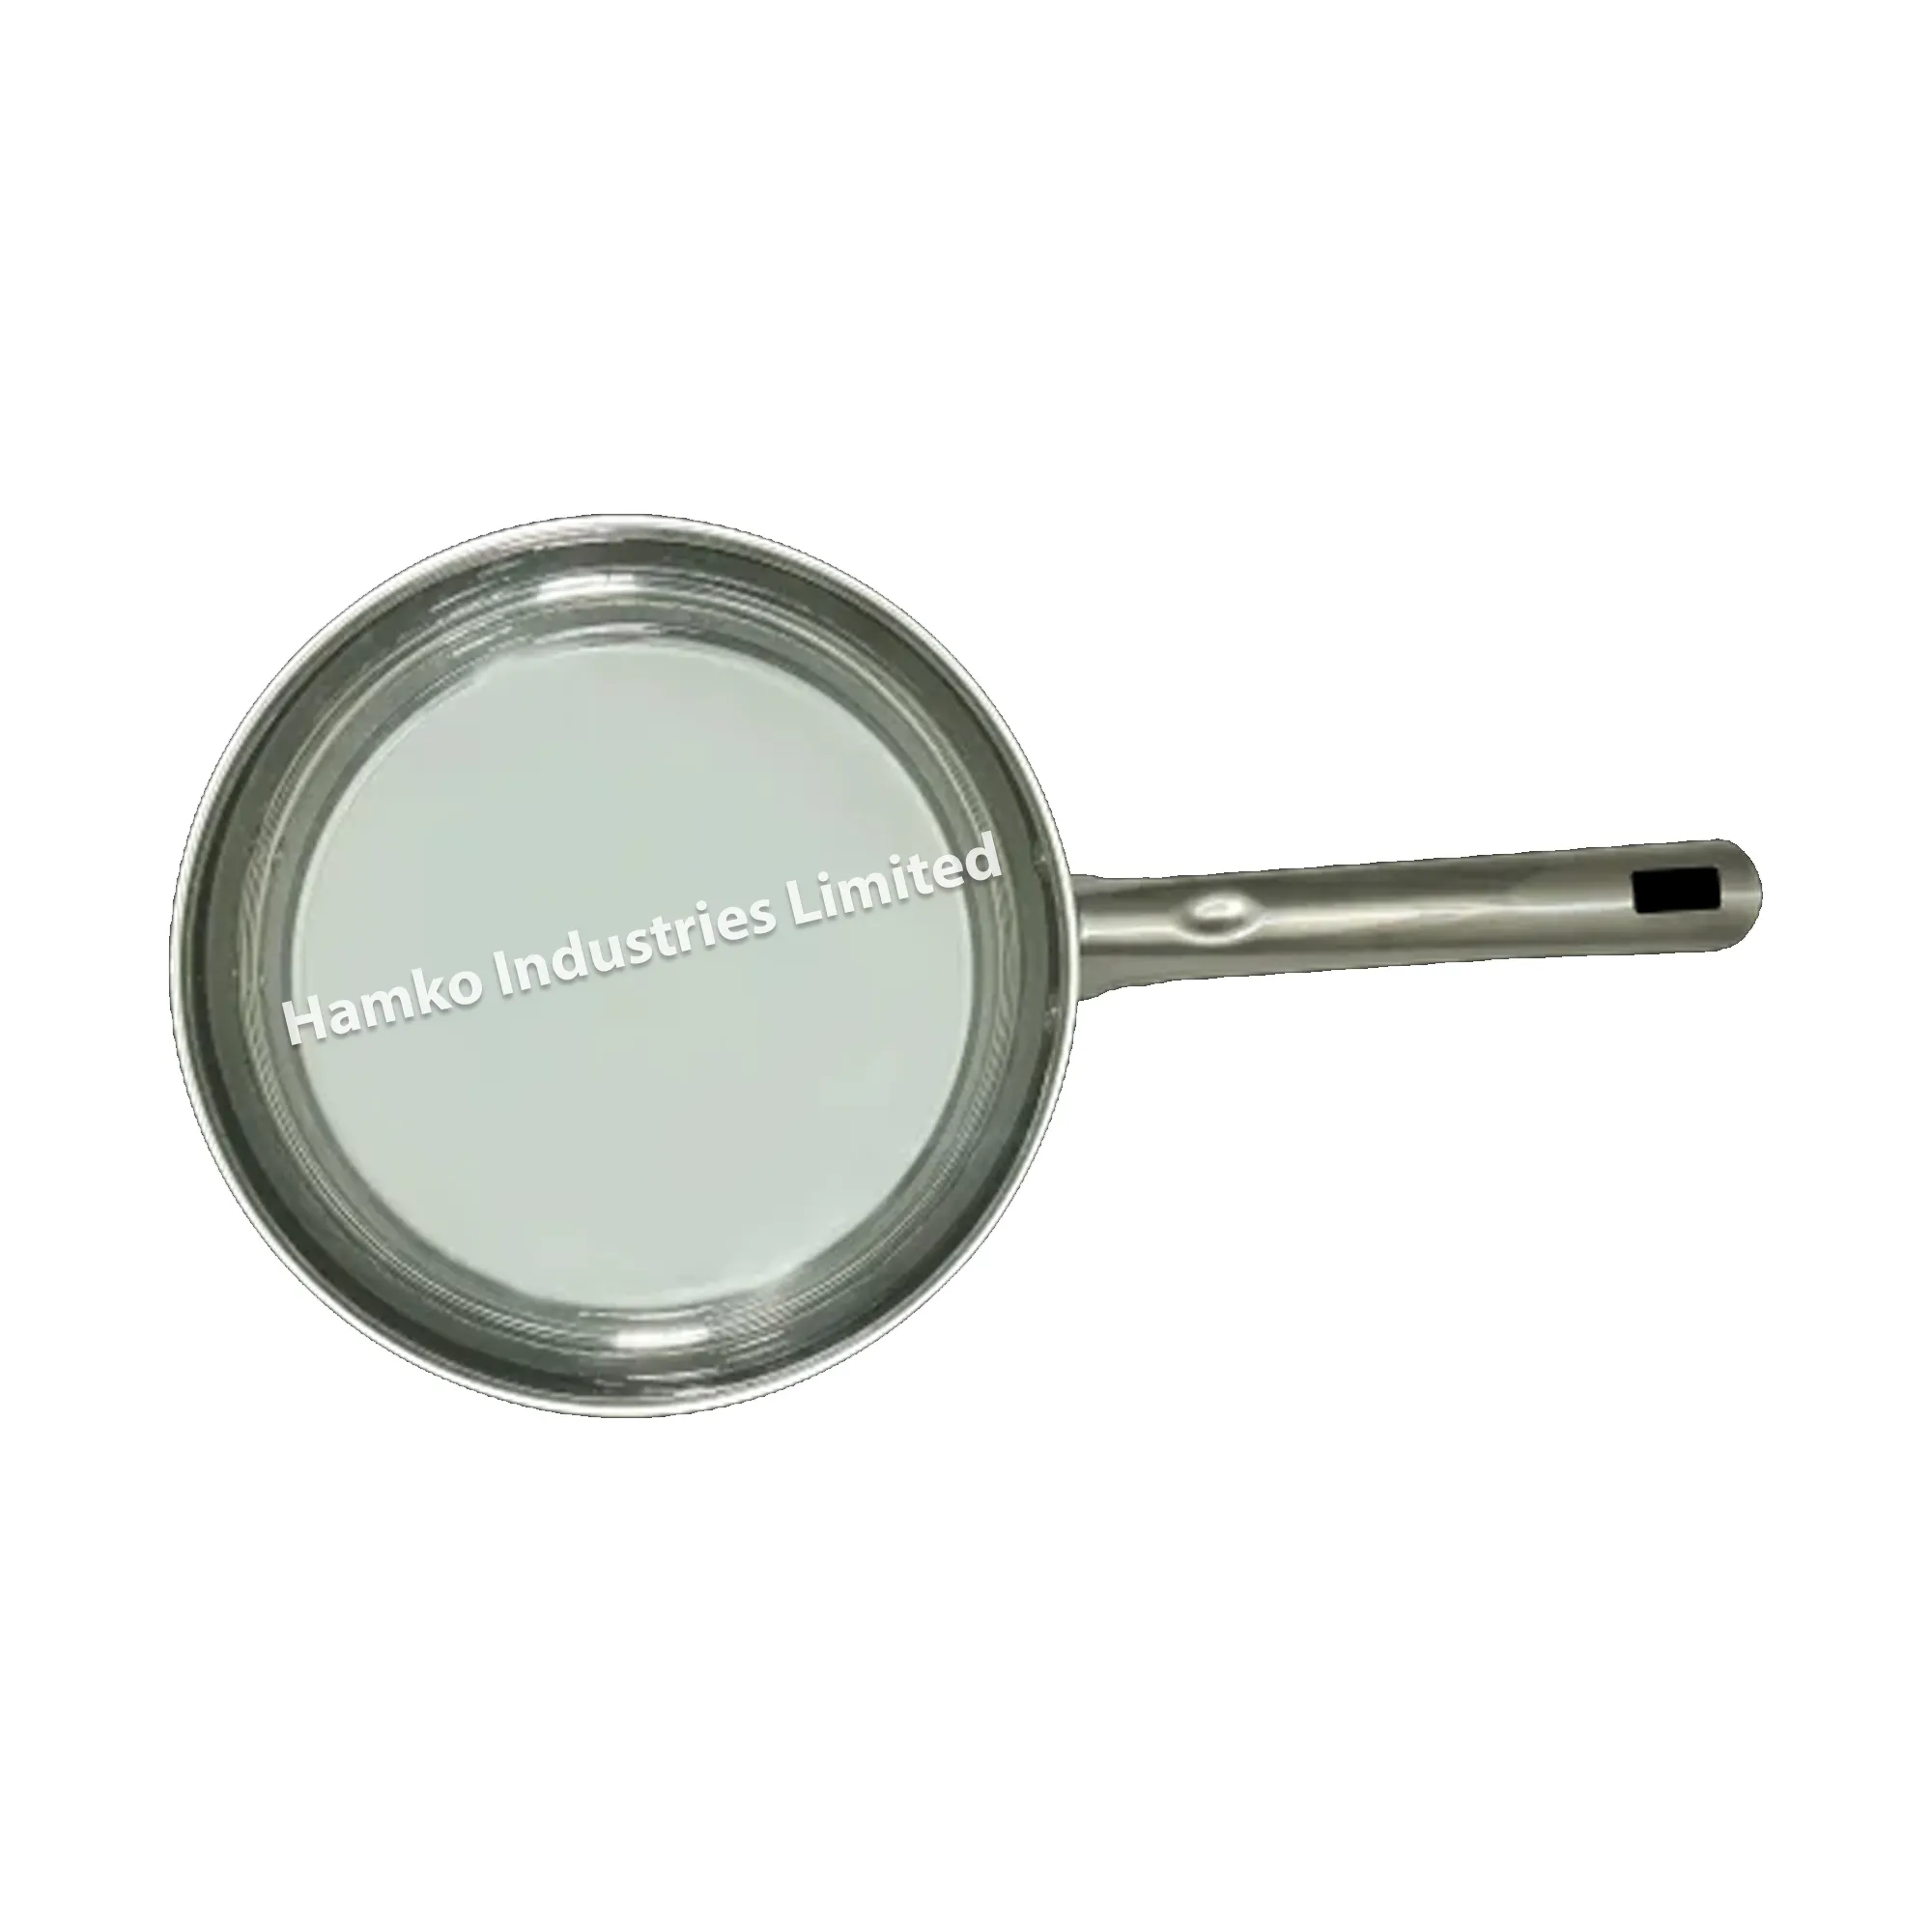 New Design Hot Sale Low Price Customized Cookware Kitchen Accessories Long Handle Stainless Steel Fry Pan 24 cm From Bangladesh